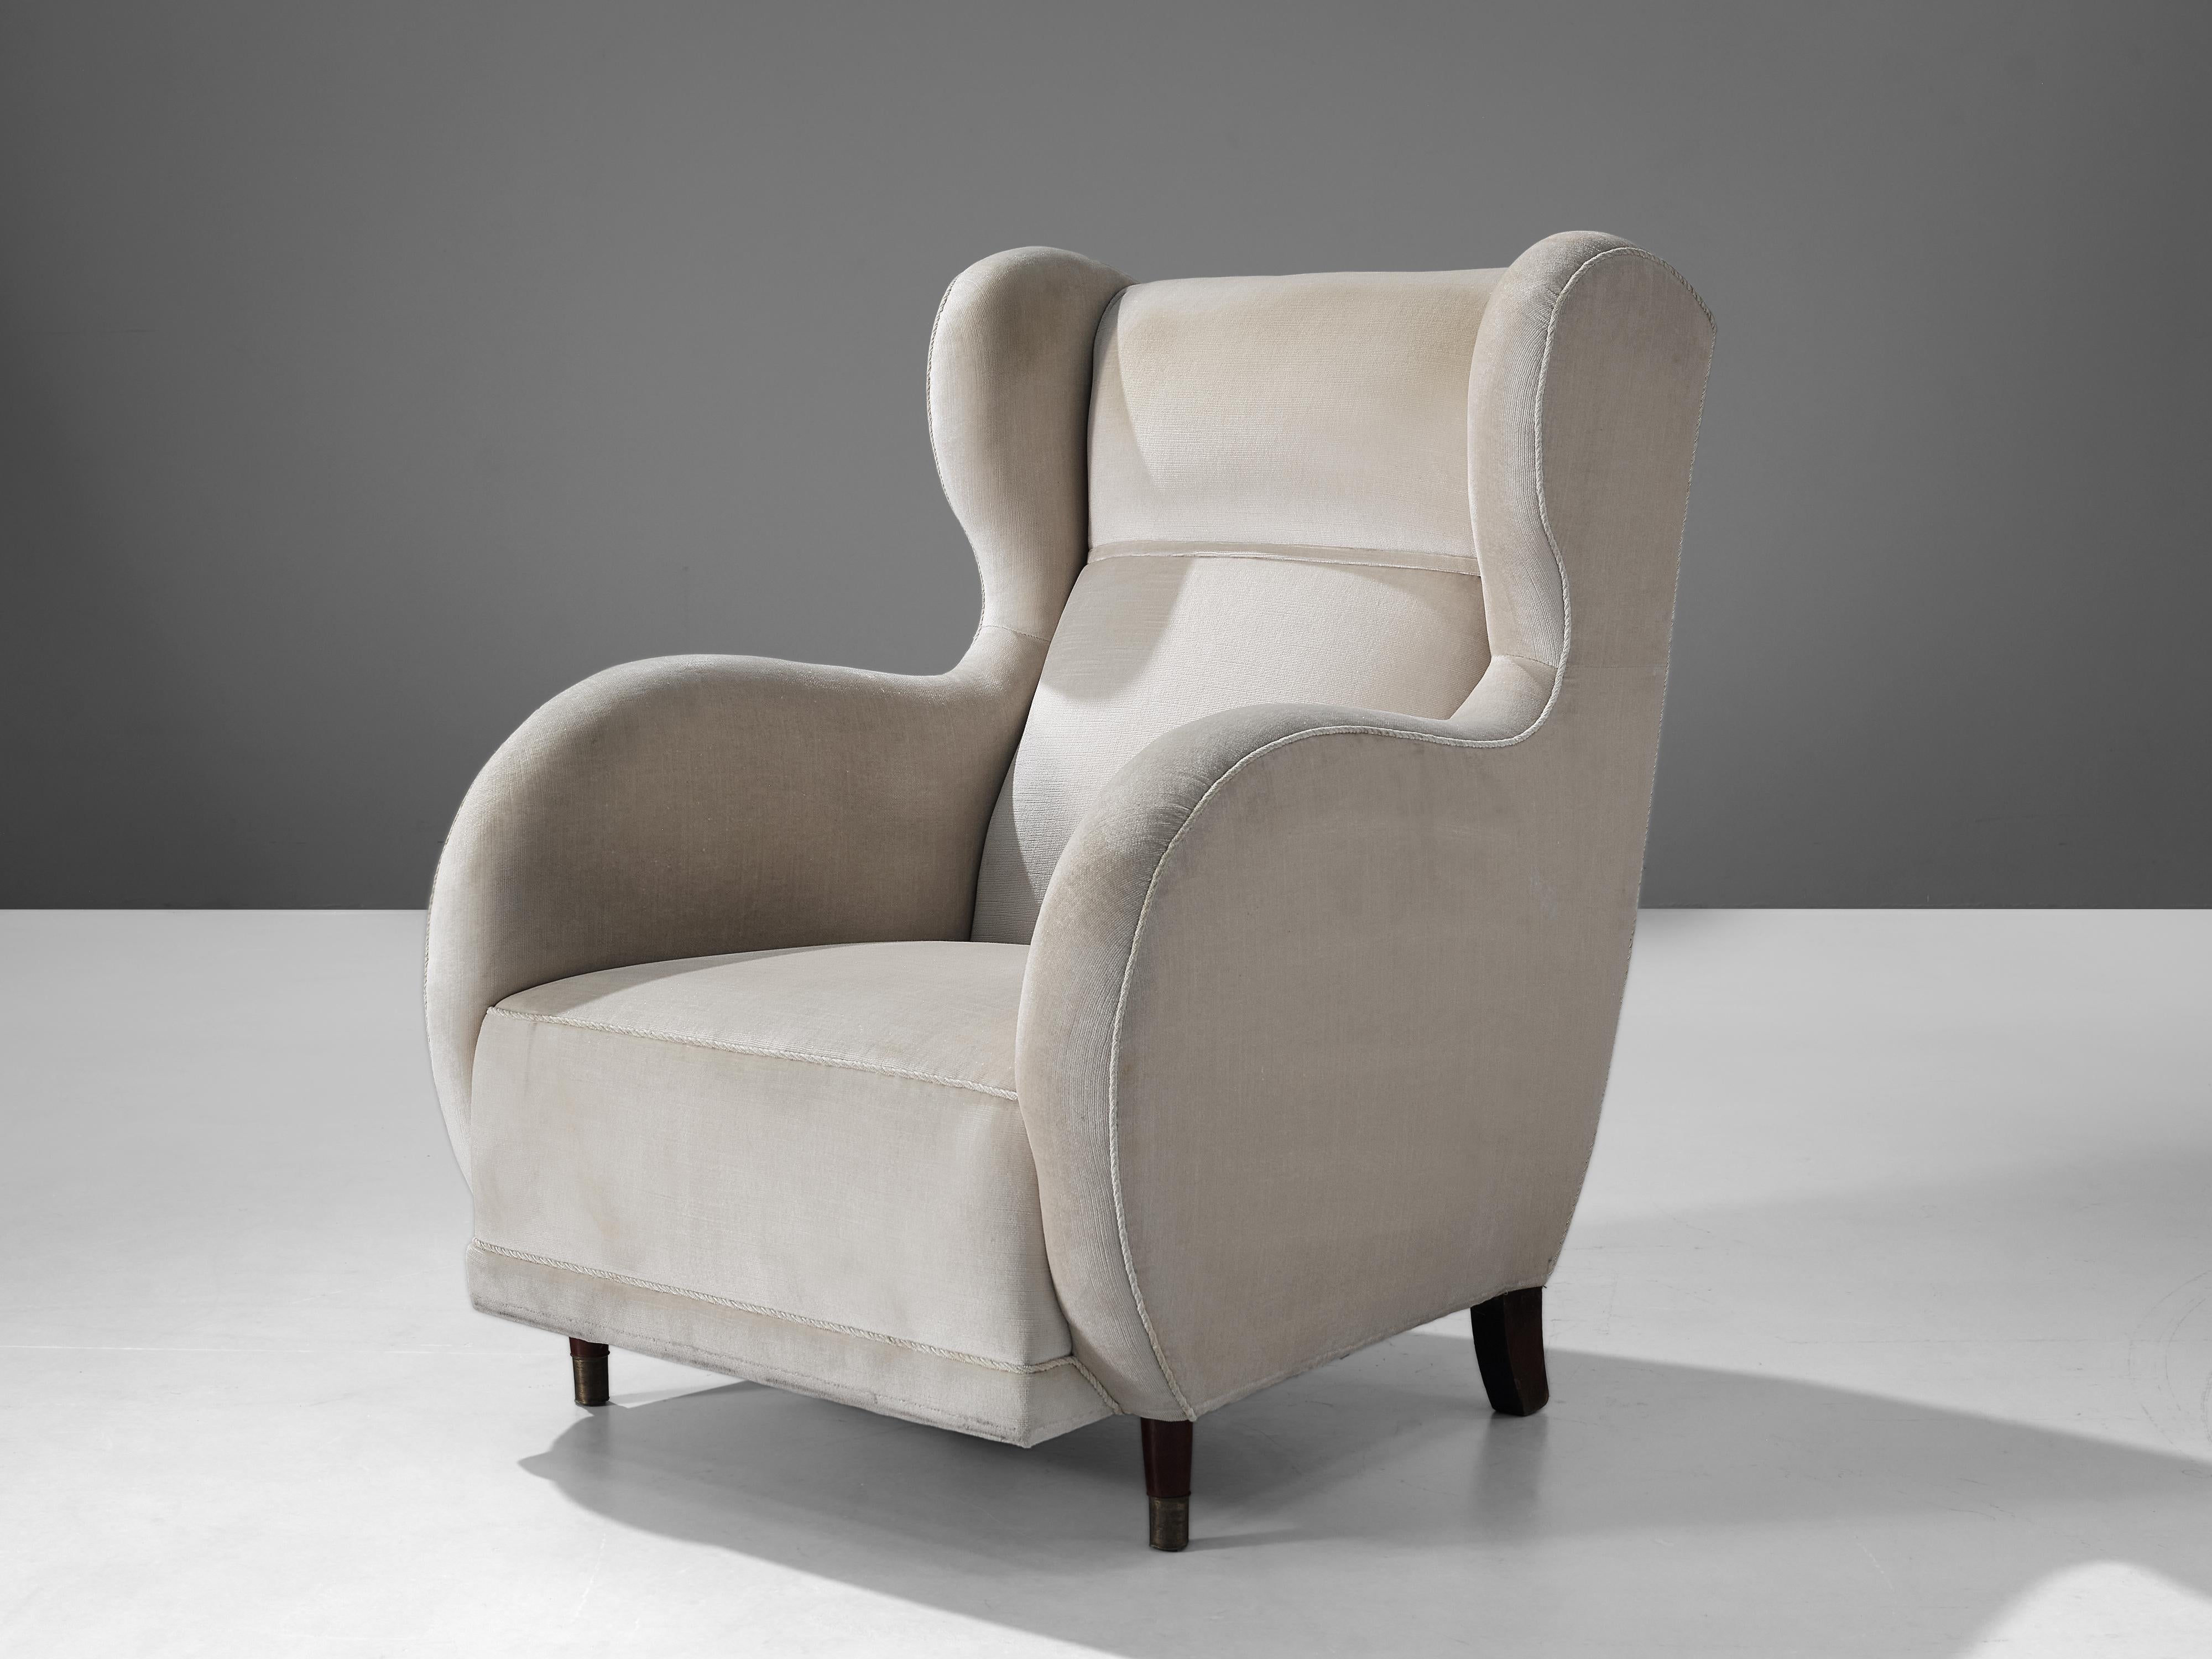 Lounge chair, wood, off-white fabric, Denmark, 1950s

This archetypical wingback chair of the 1950s is both extremely comfortable and pleasing to the eyes. This easy chair with wooden legs features a modest wing and bulky, round armrests. The seat